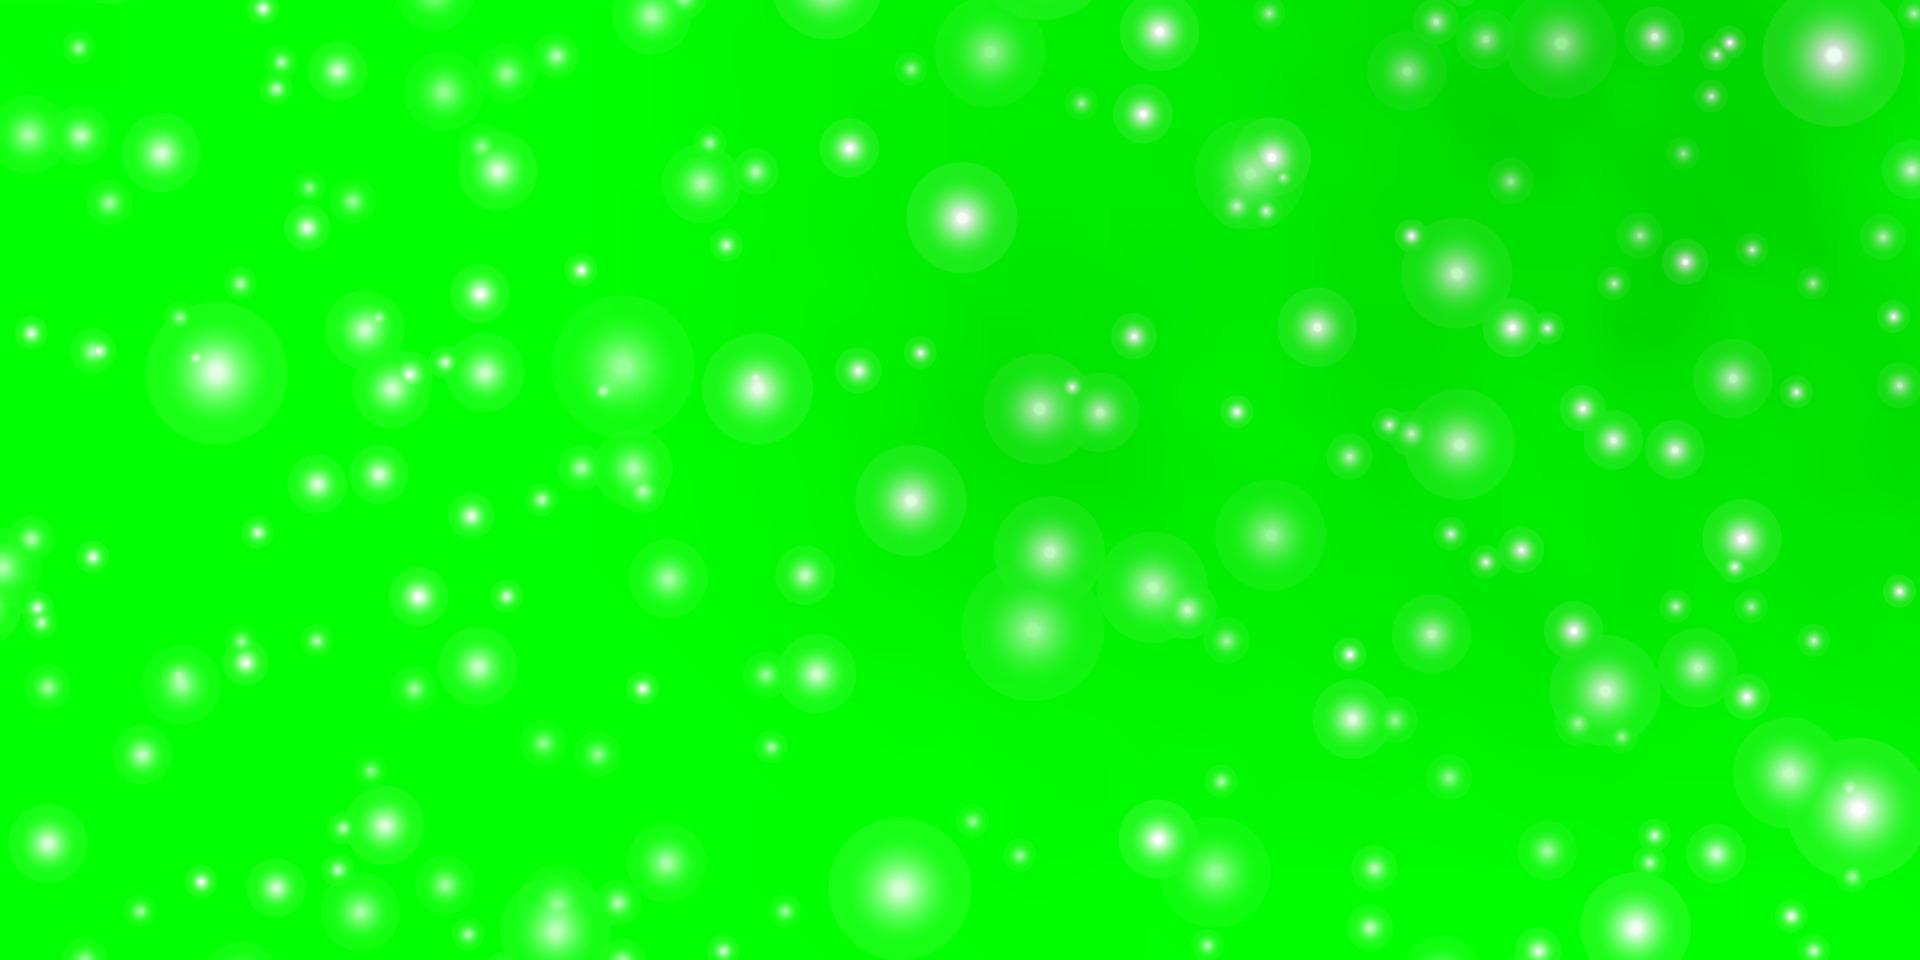 Light Green vector pattern with abstract stars.